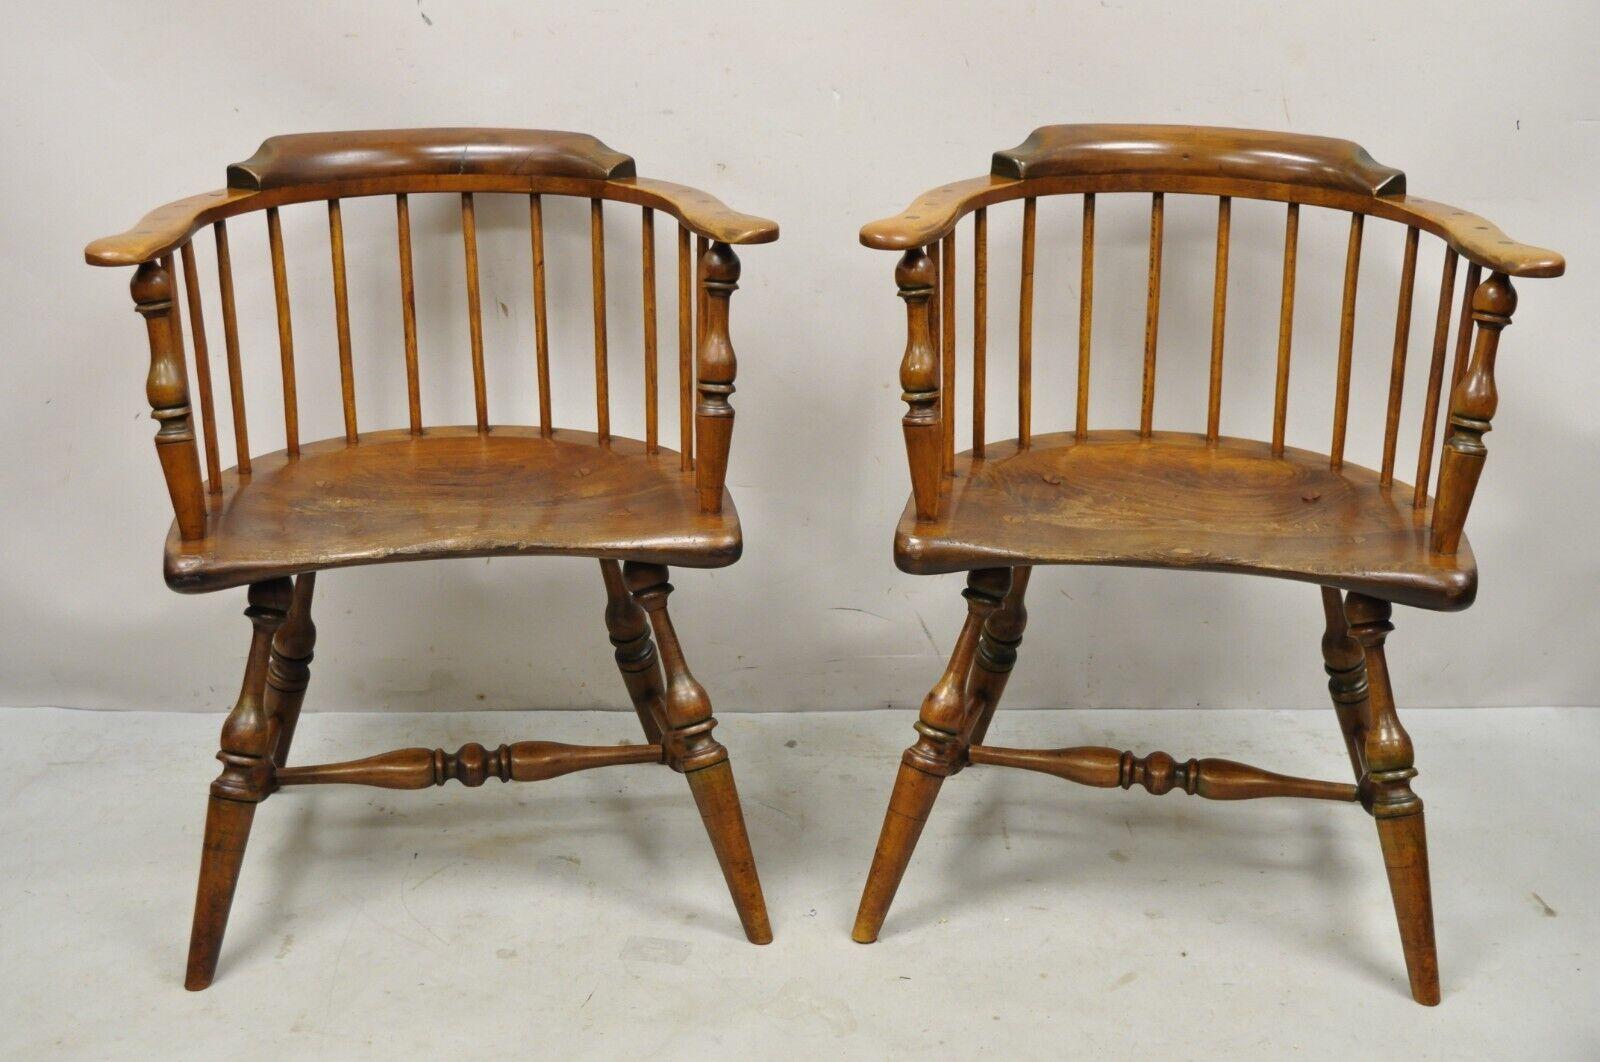 Antique Windsor Colonial style pine wood spindle pub arm chairs - a pair. Item features a carved serpentine plank seat, exposed joints, solid wood frames, beautiful wood grain, distressed finish, very nice antique pair, quality American